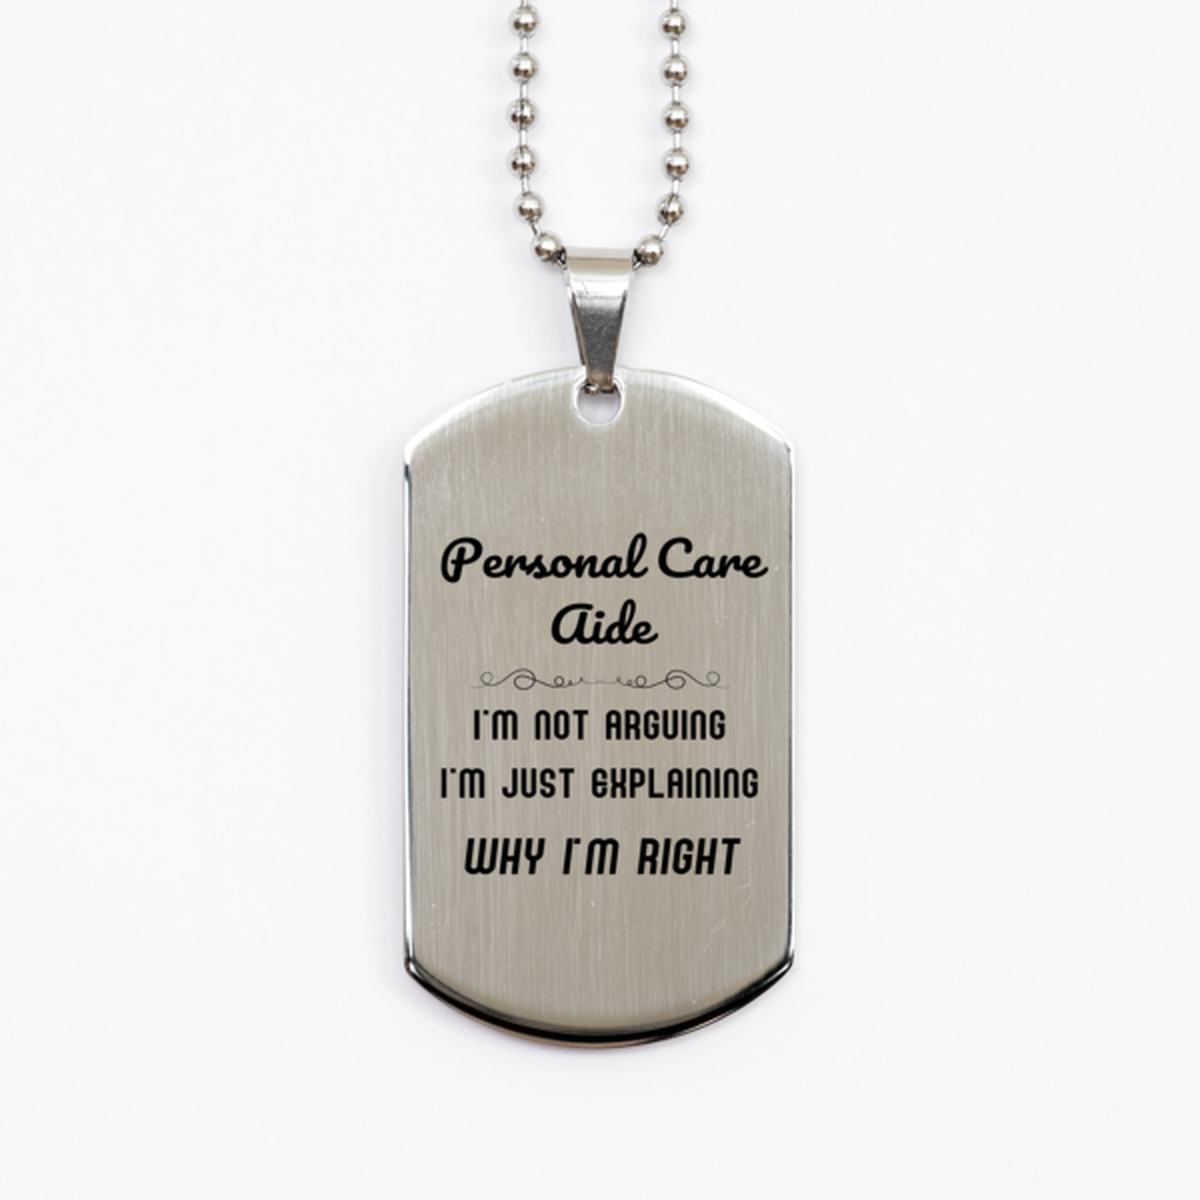 Personal Care Aide I'm not Arguing. I'm Just Explaining Why I'm RIGHT Silver Dog Tag, Funny Saying Quote Personal Care Aide Gifts For Personal Care Aide Graduation Birthday Christmas Gifts for Men Women Coworker